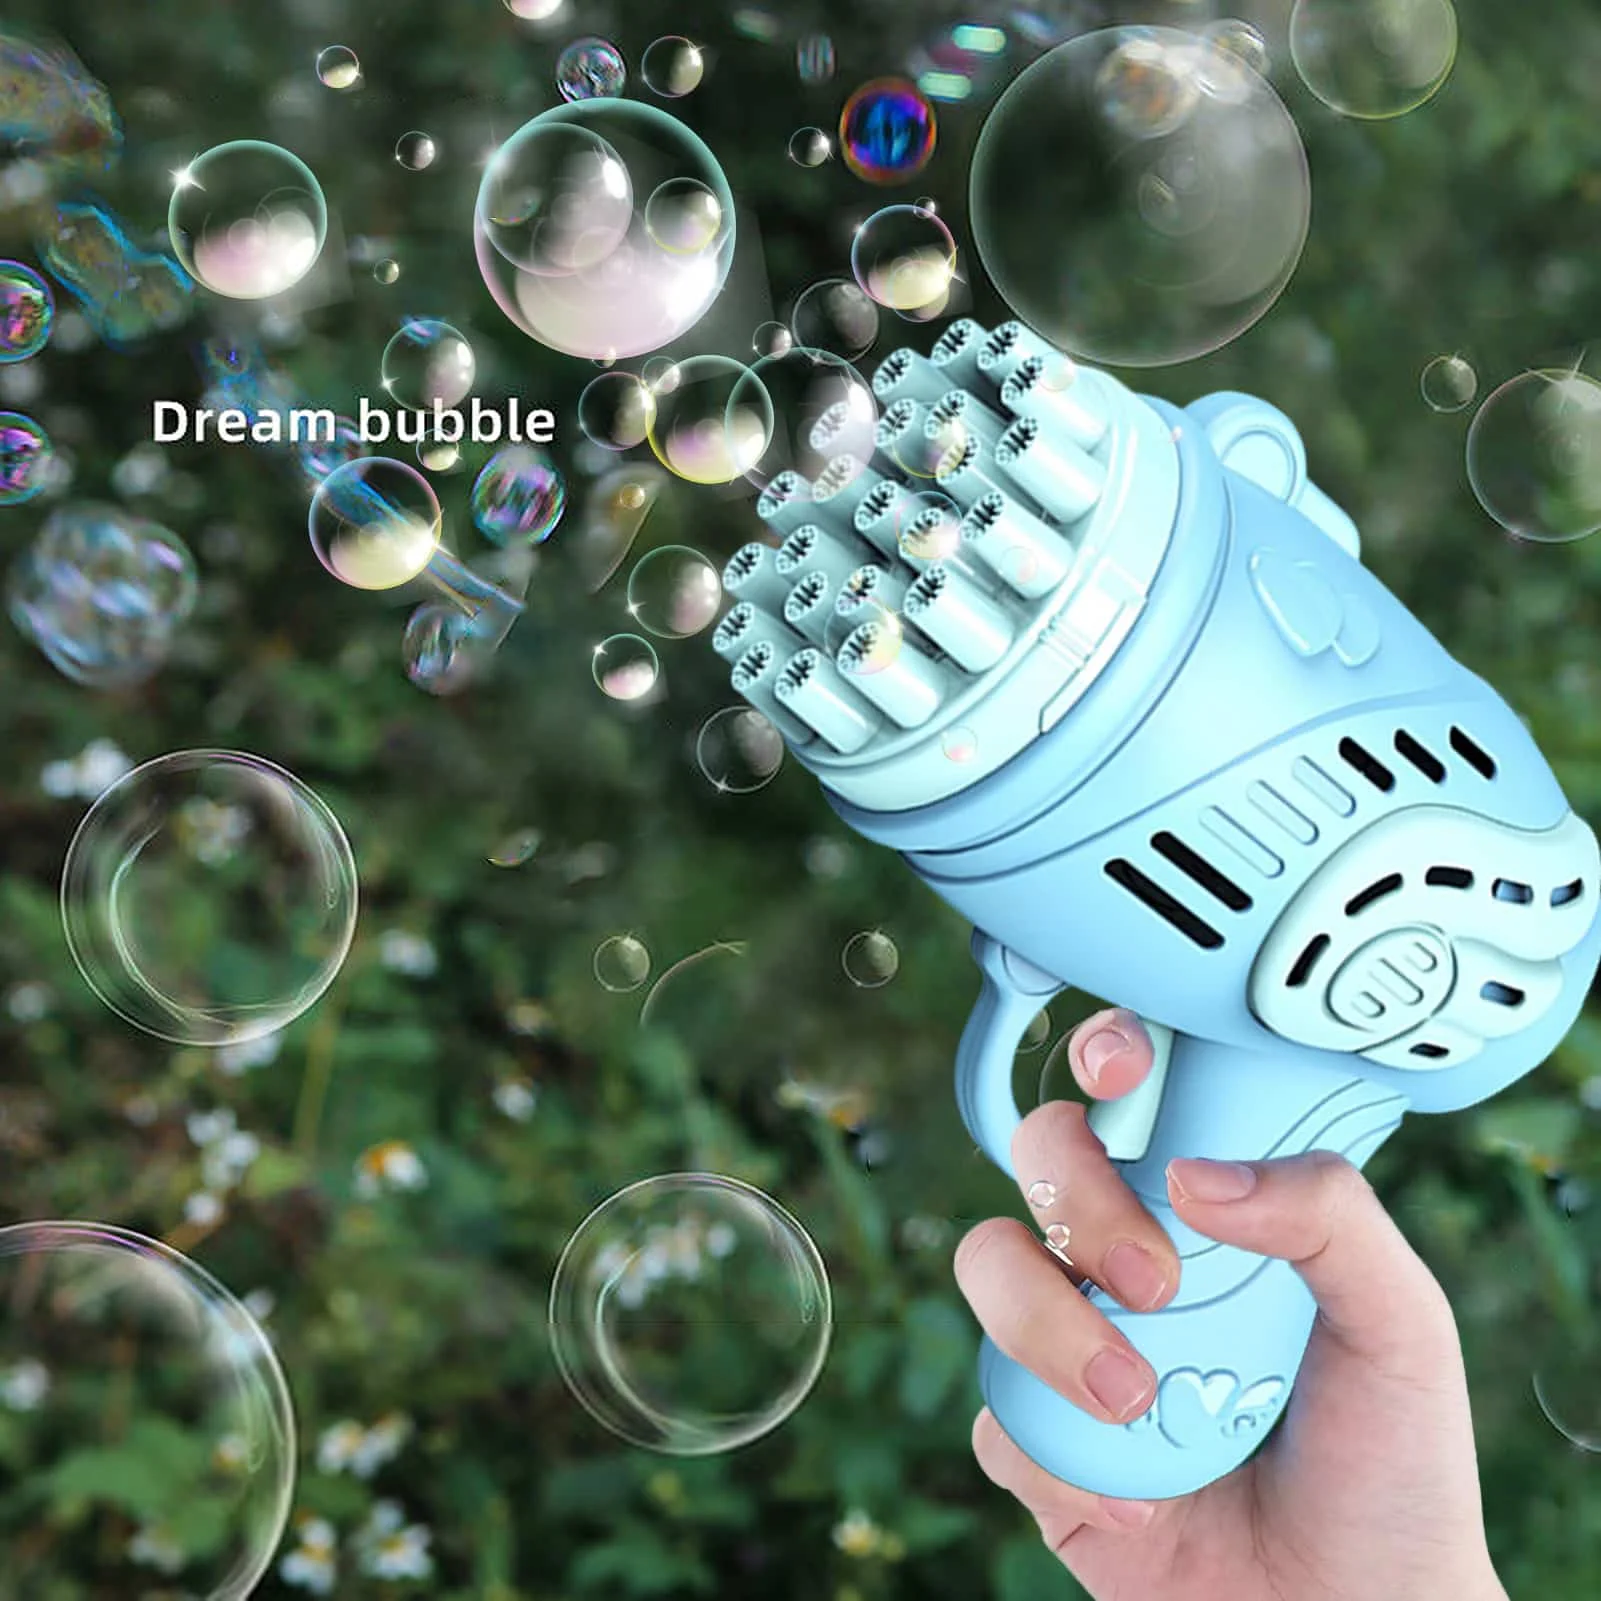 

23 Hole Bubble Machine GatlingBubble Blower Launcher Rocket Toy For Kids Battery Operated Bubble Guns For 4-10 Years Old